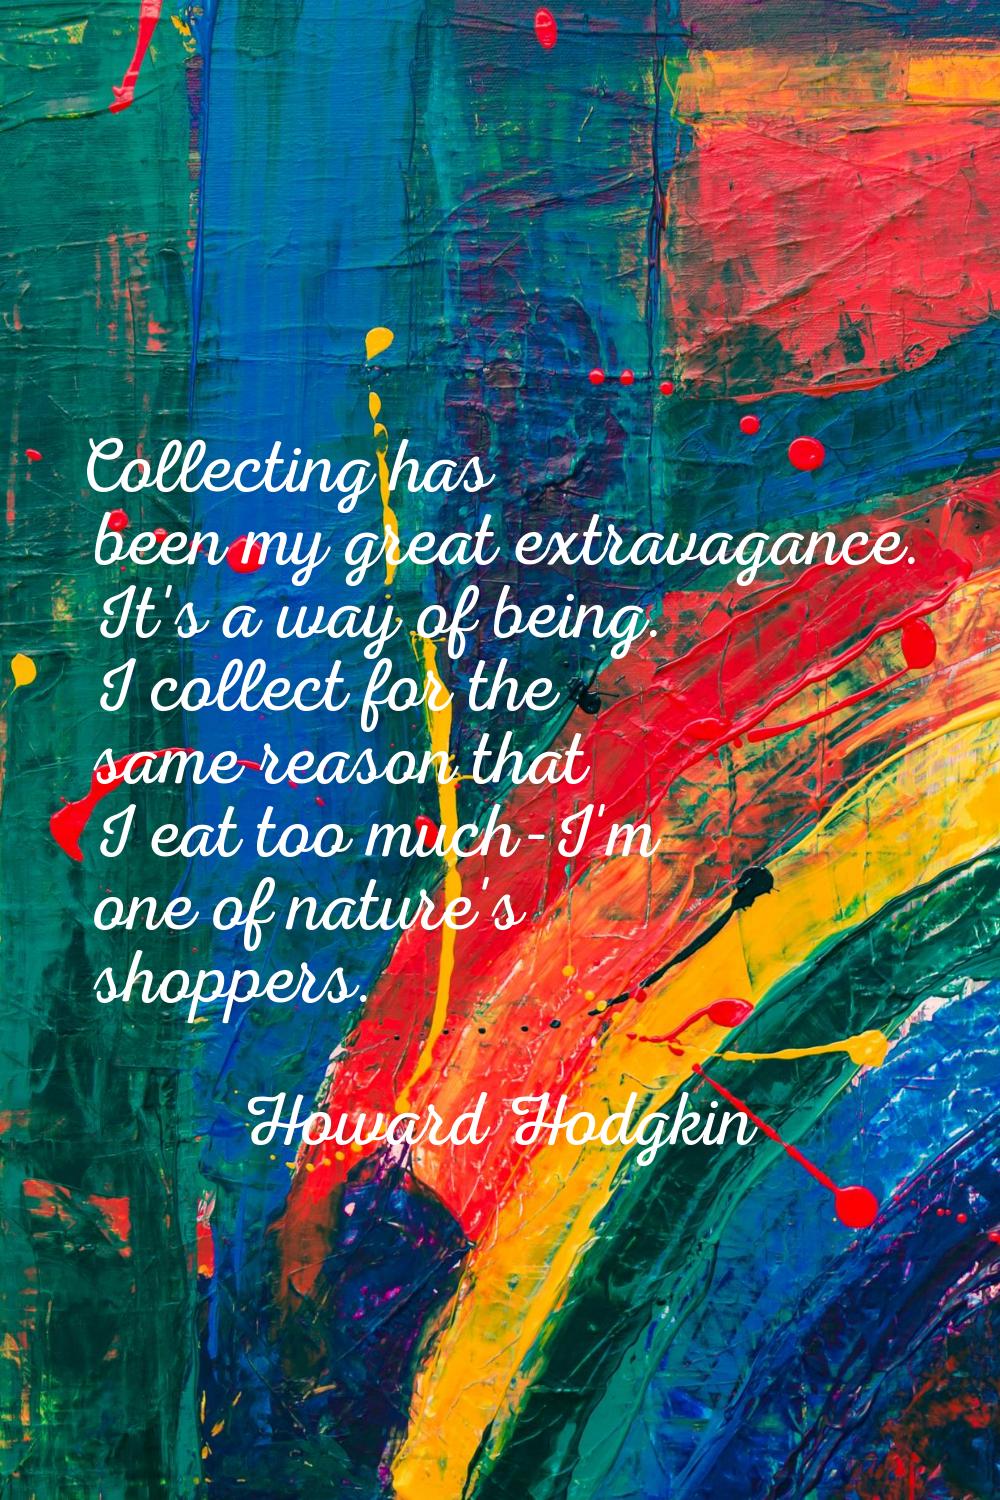 Collecting has been my great extravagance. It's a way of being. I collect for the same reason that 